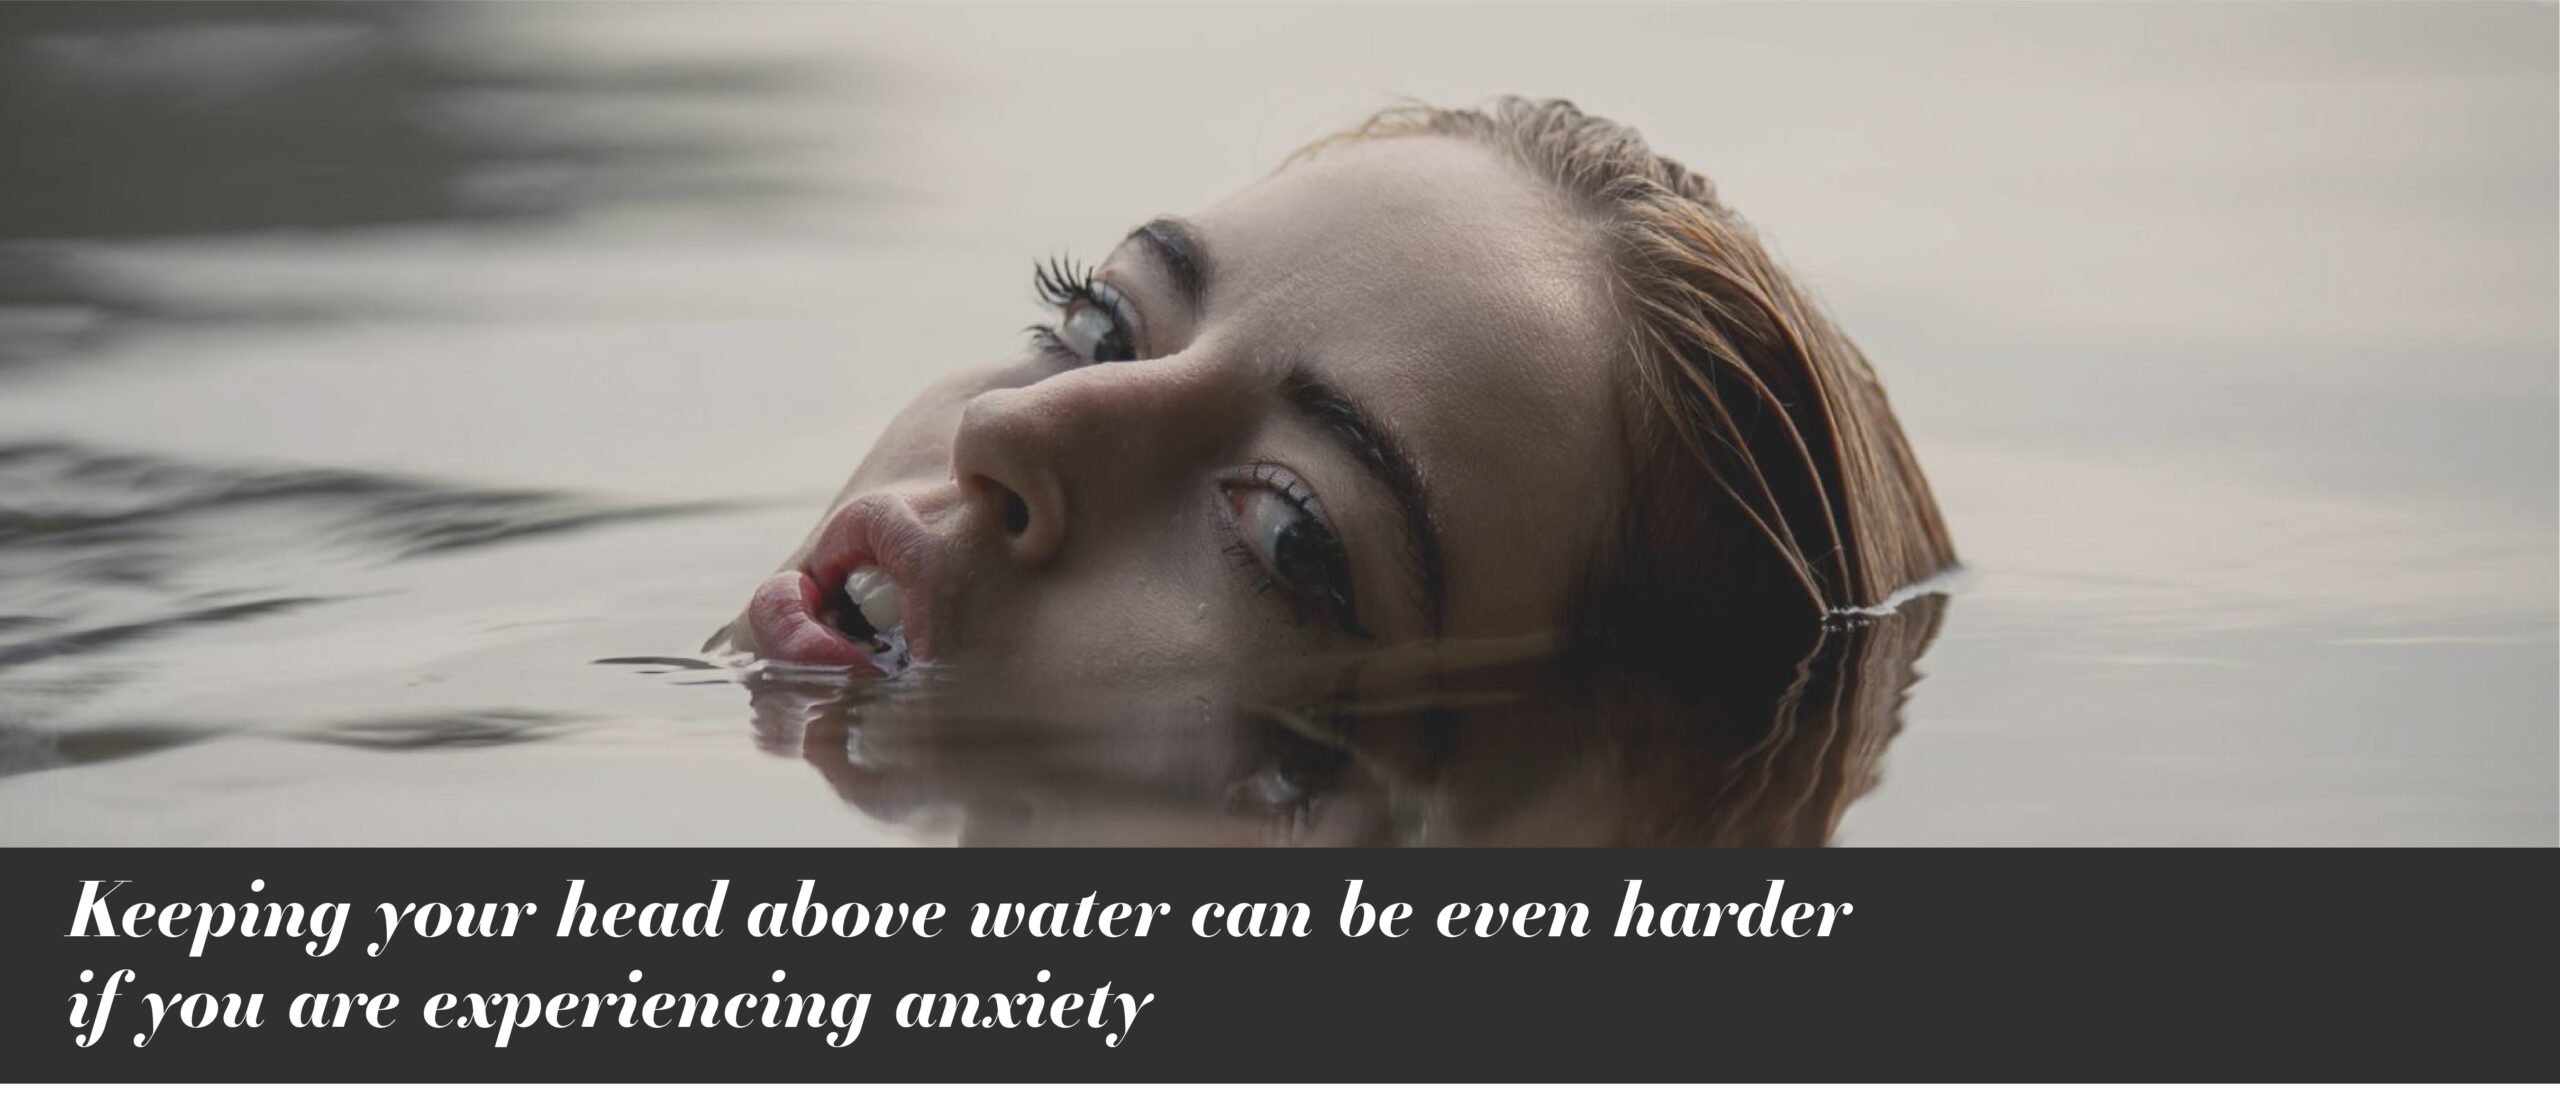 How your Anxiety Is Taking Over